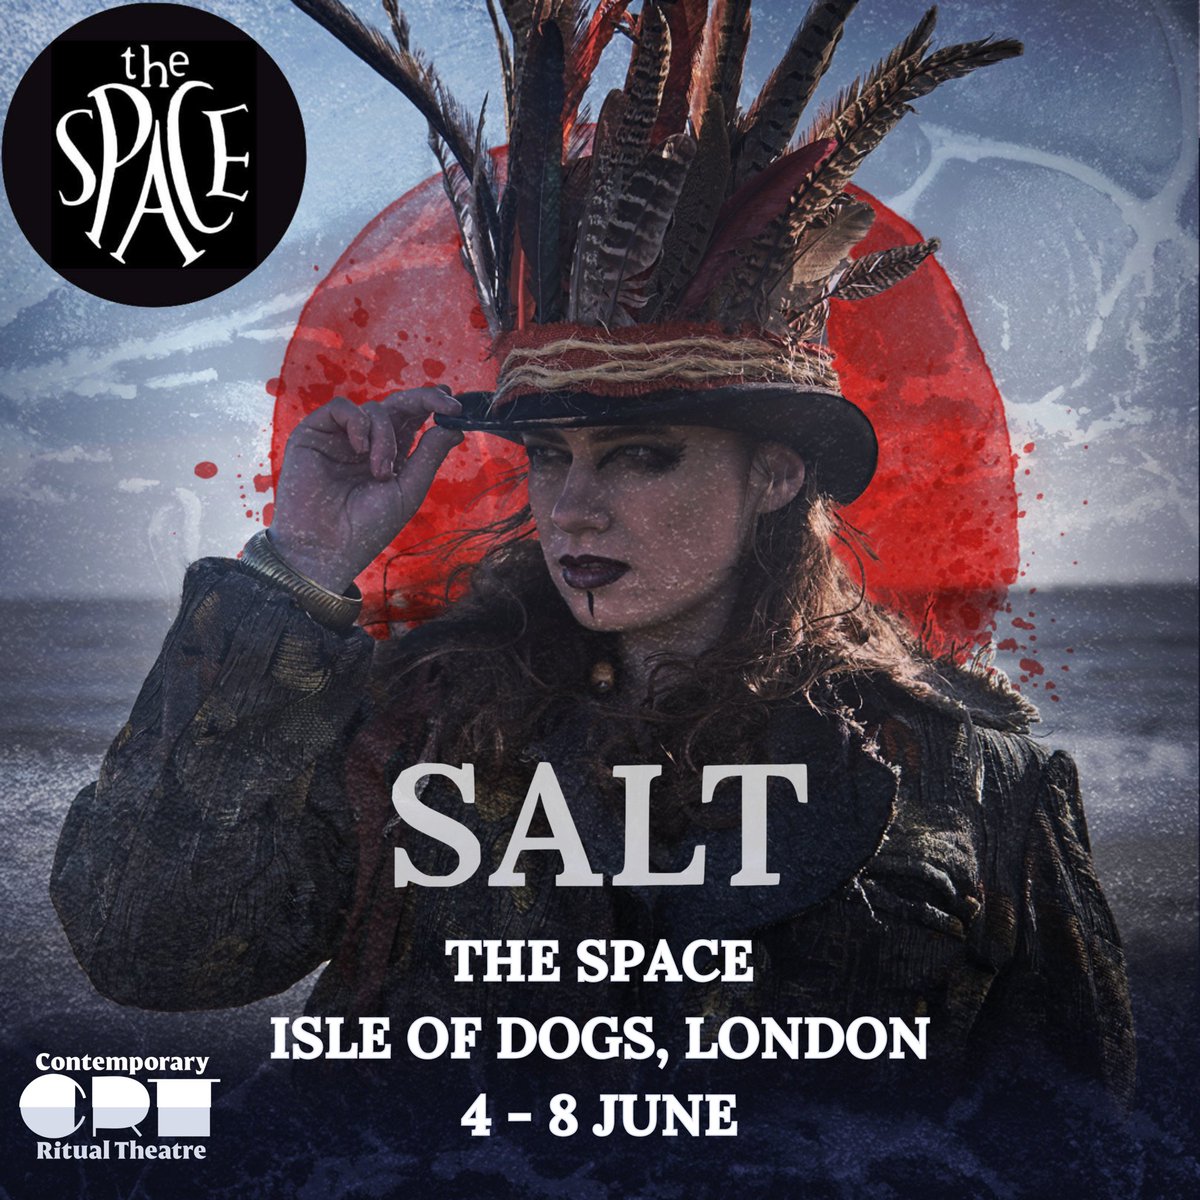 #SALT will end it’s ELECTRIFYING run in LONDON @SpaceArtsCentre 

Don’t miss the most unique and visceral theatre event of the summer!

20% off tickets if bought before May 21st. Tickets in bio.

#SaltPlay #RitualTheatre #londontheatre #britishtheatre #fringe #newwriting #newplay